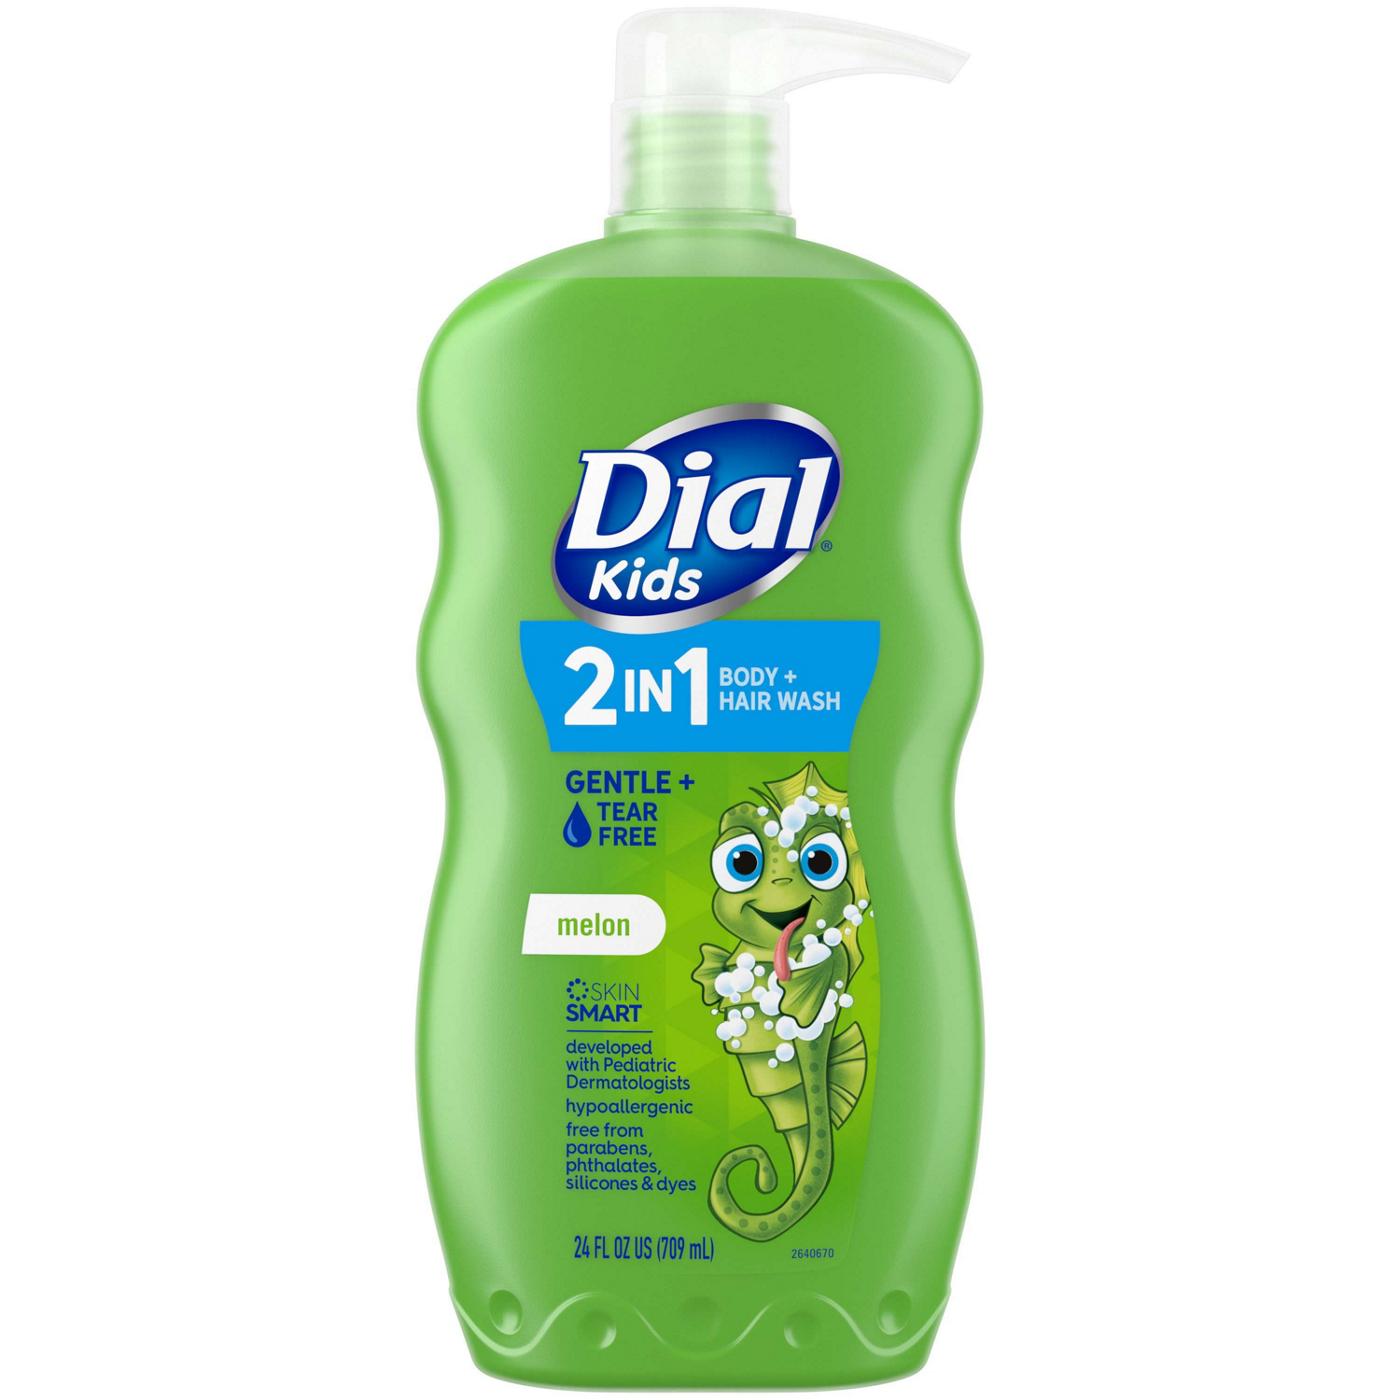 Dial Kids 2-in-1 Body + Hair Wash - Melon; image 1 of 9